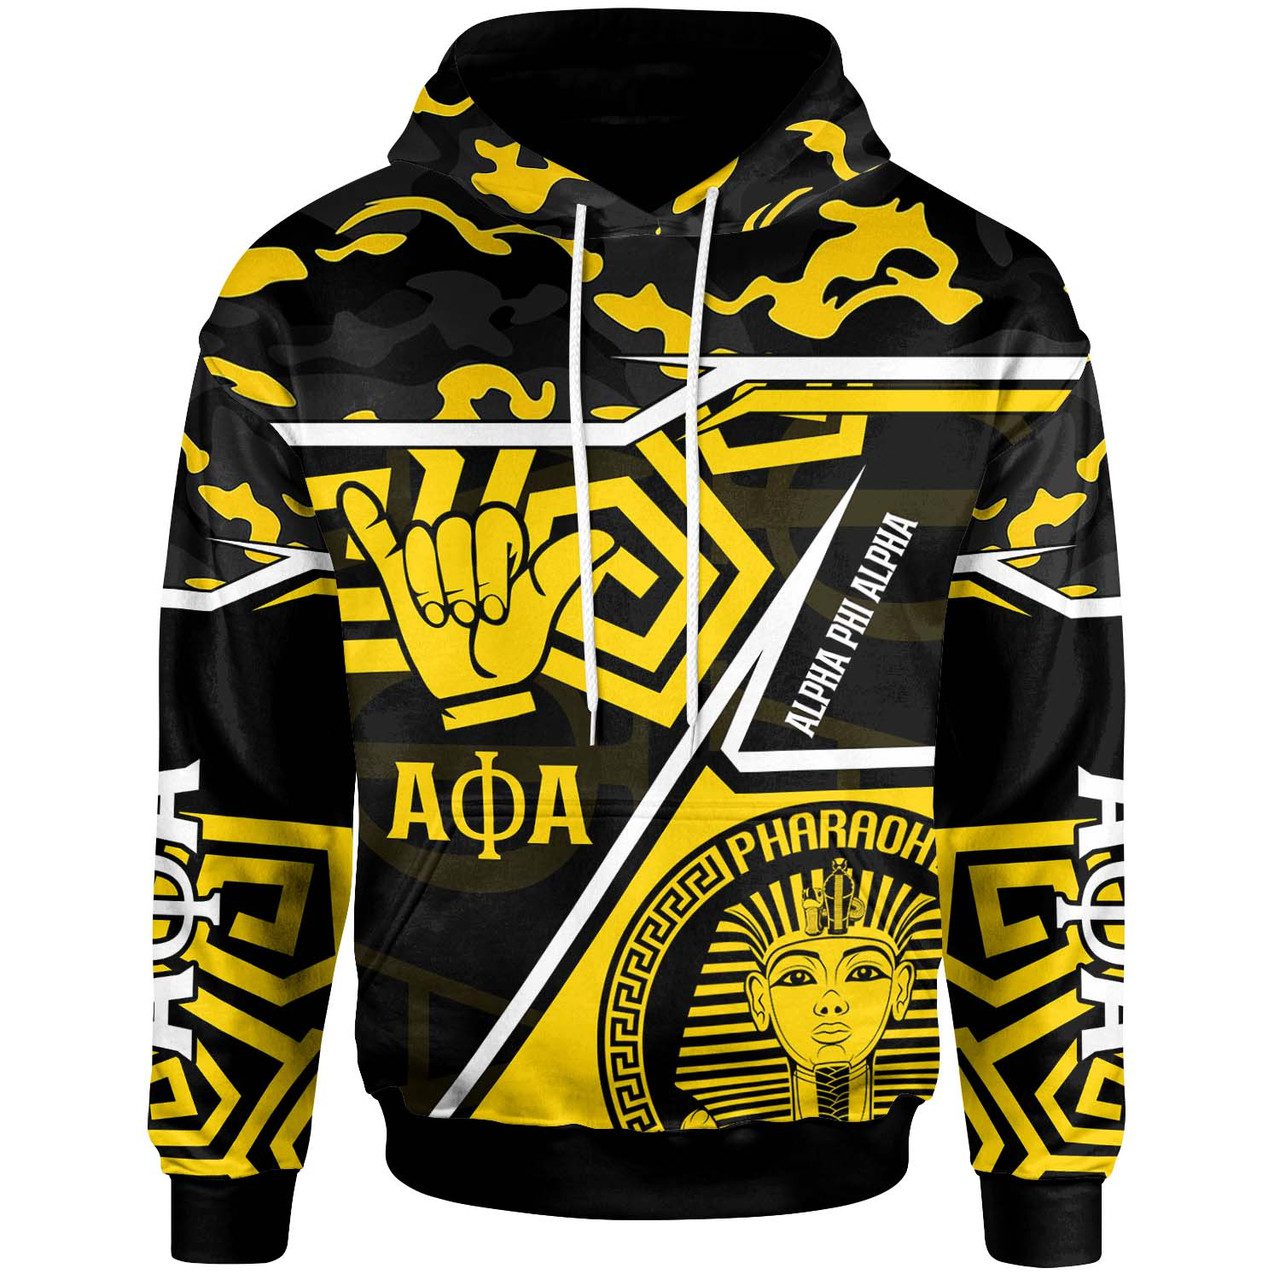 Alpha Phi Alpha Hoodie – Fraternity Alpha Phi Alpha Hand Sign with Camouflage Pattern Hoodie